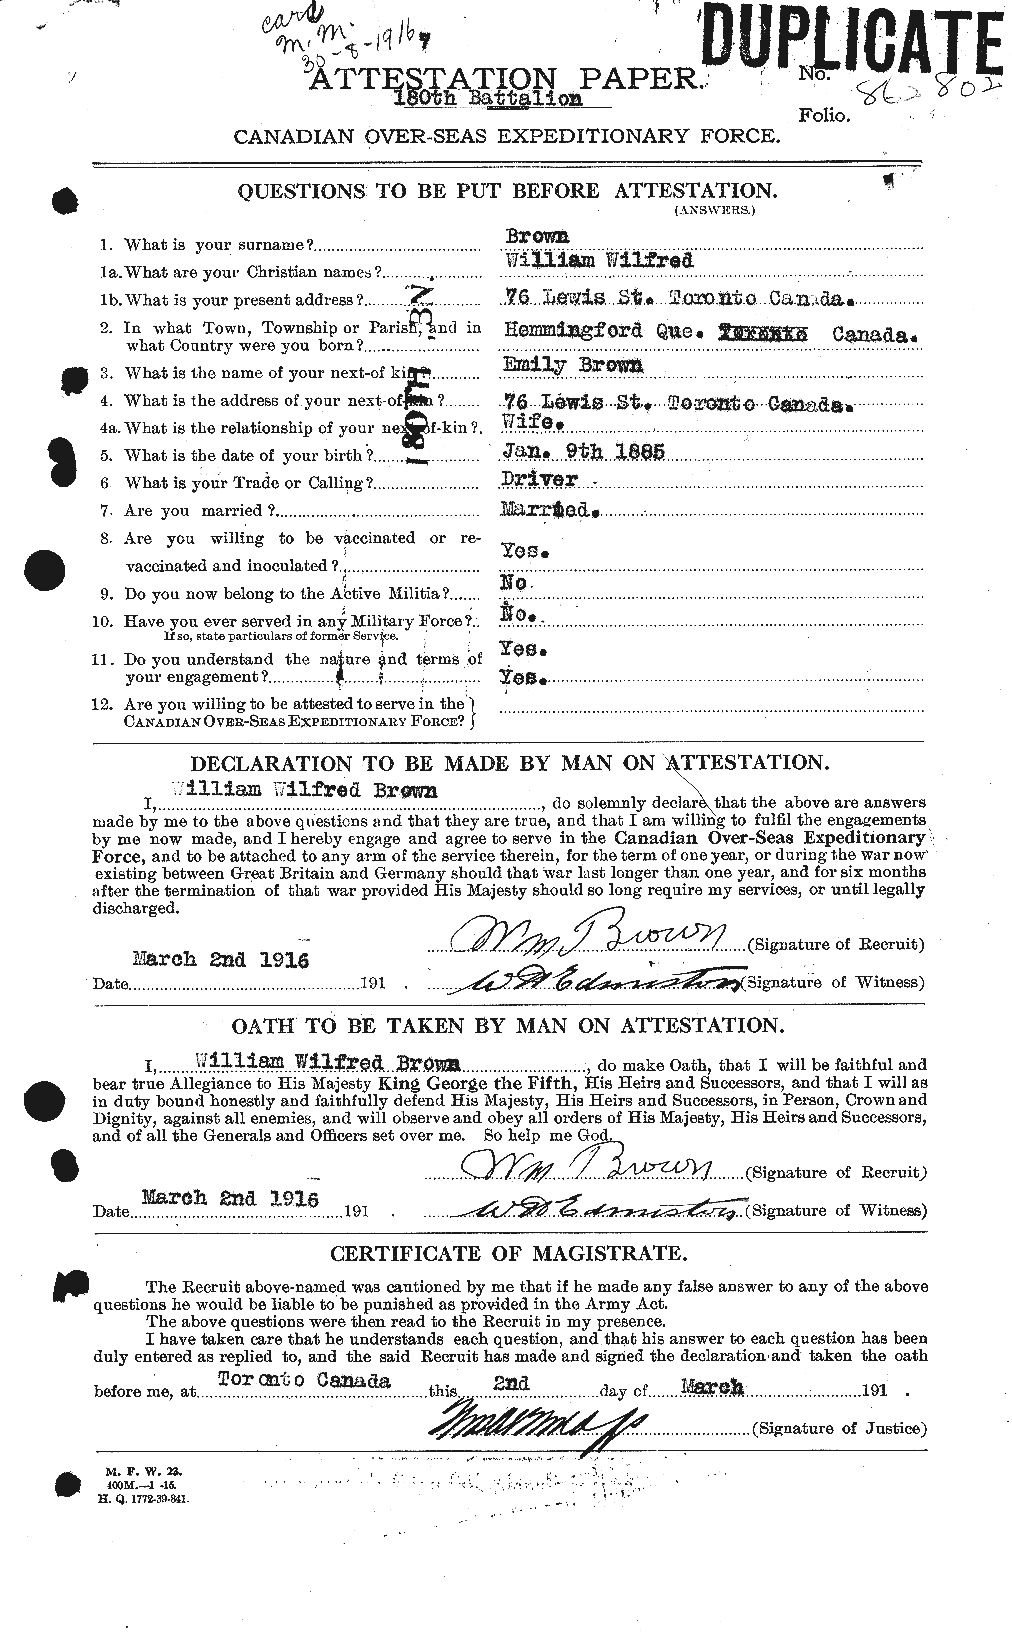 Personnel Records of the First World War - CEF 270904a